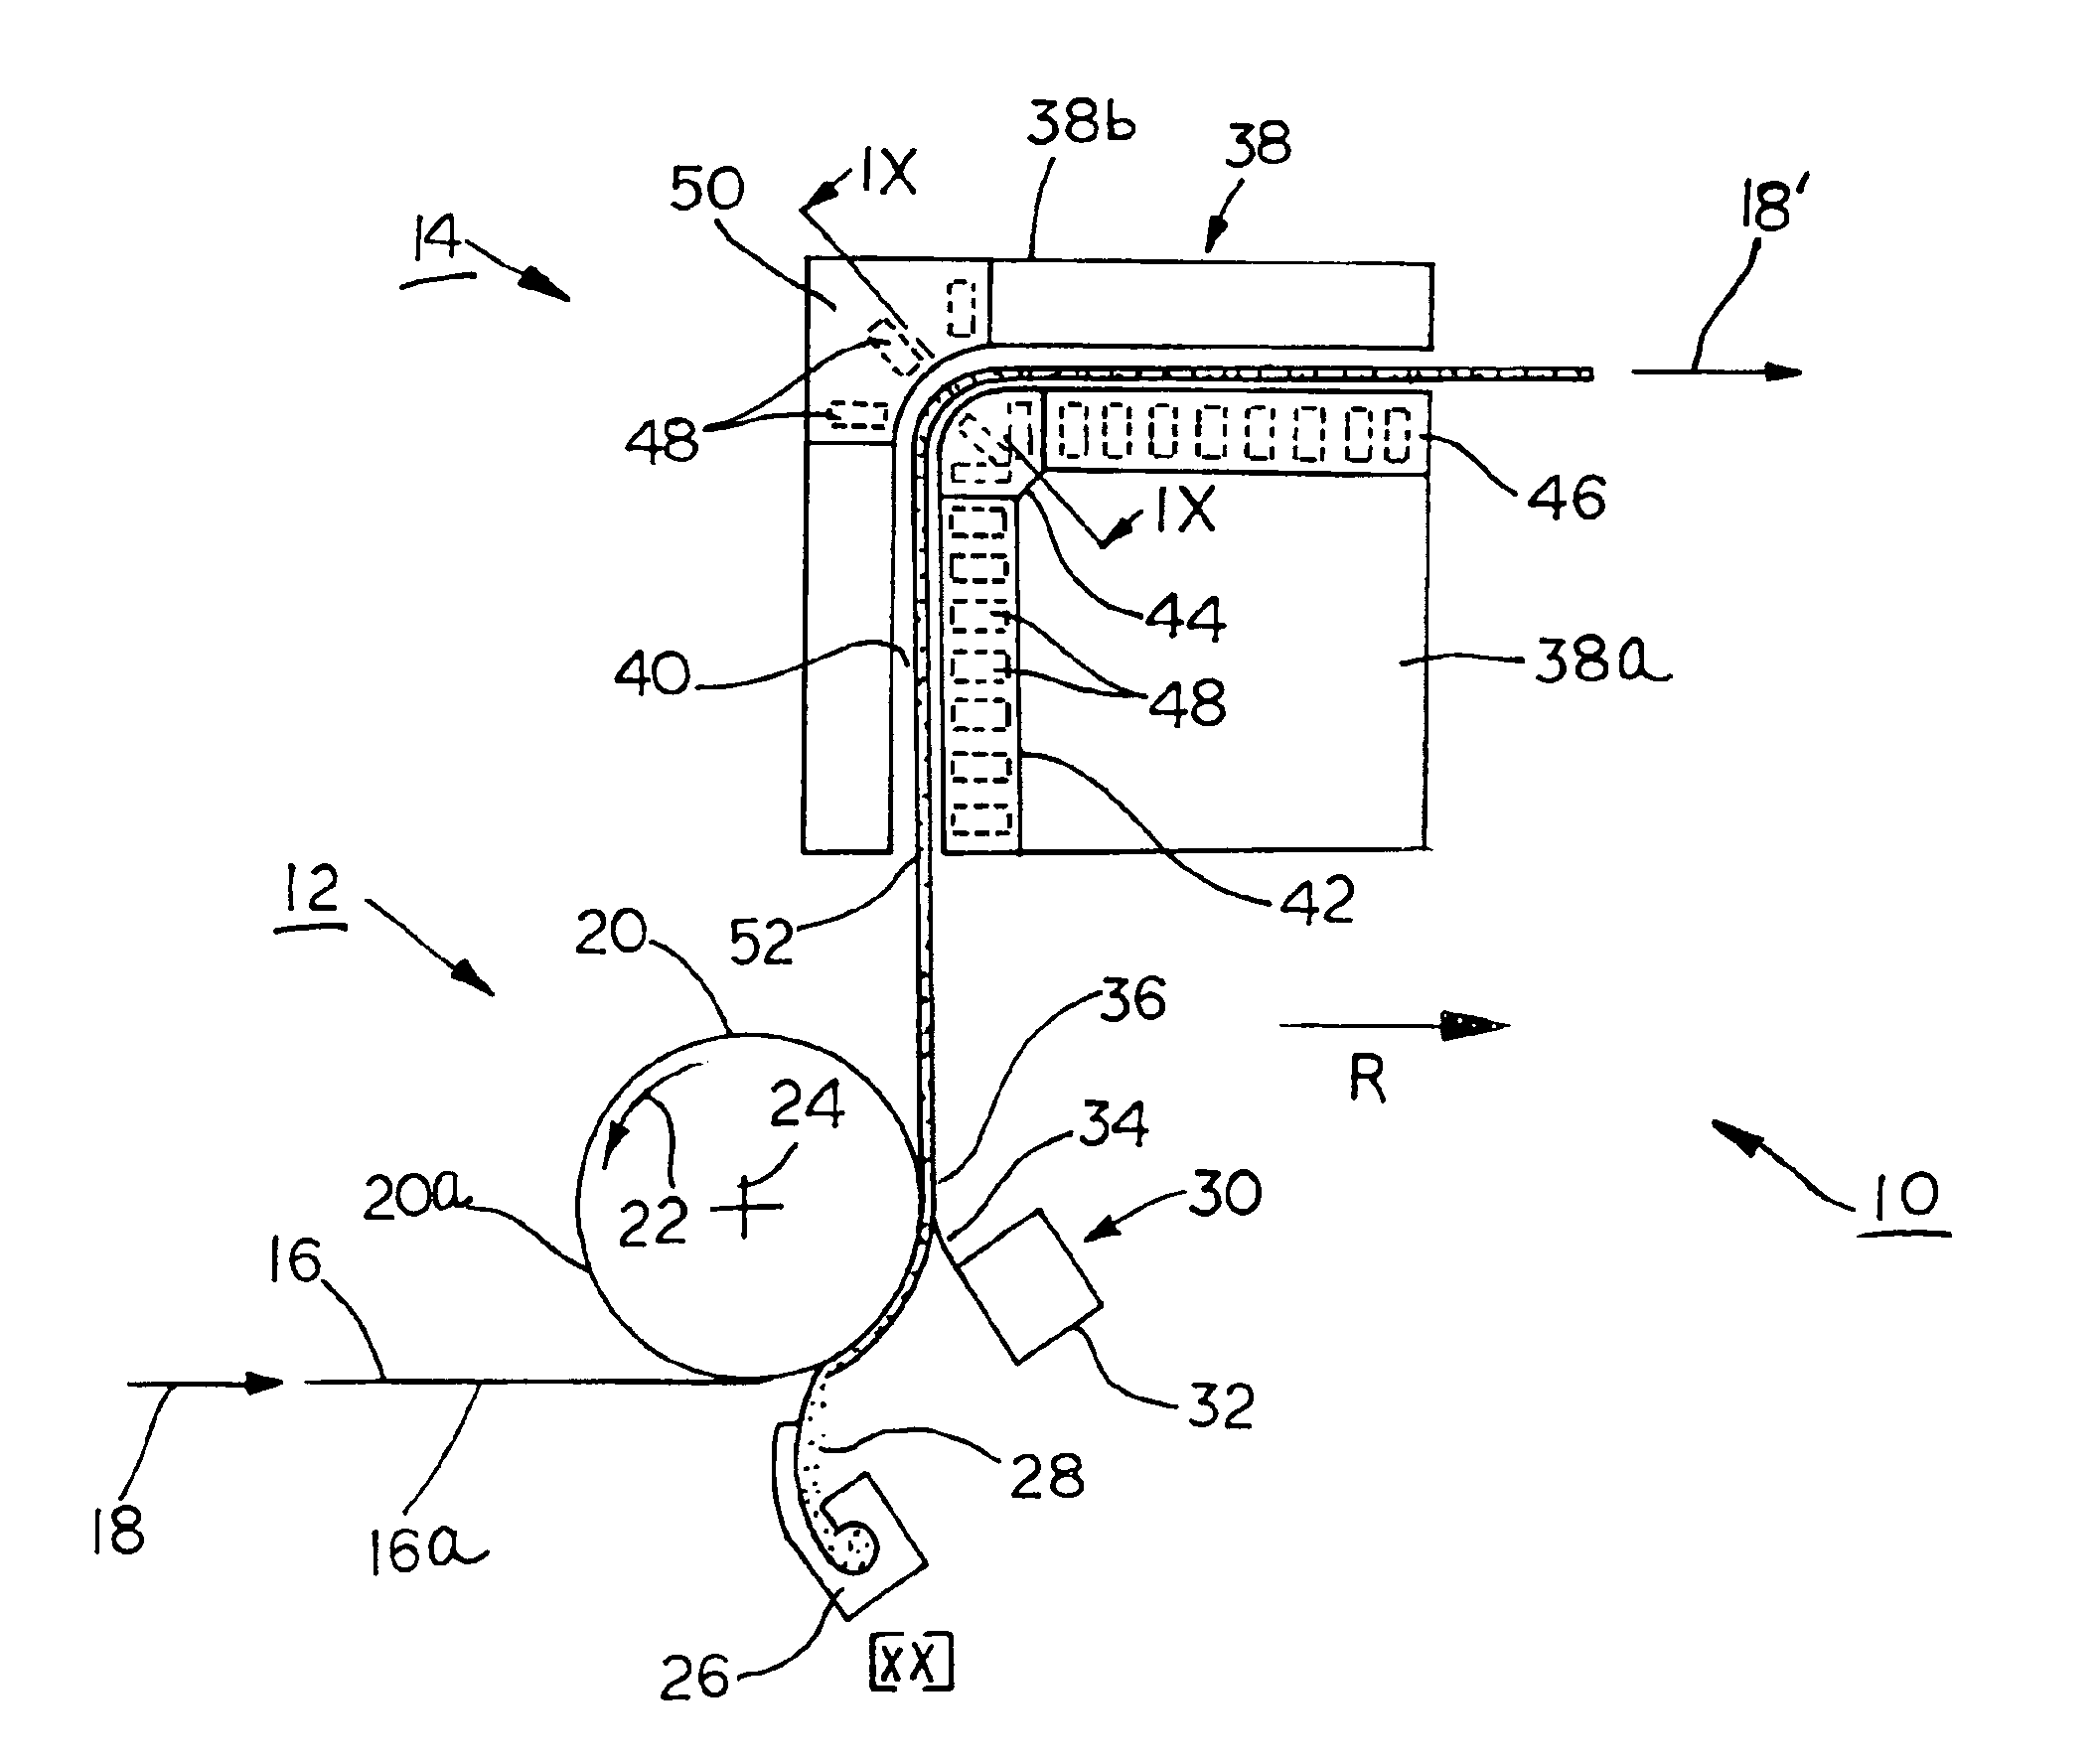 Apparatus for coating moving fiber webs